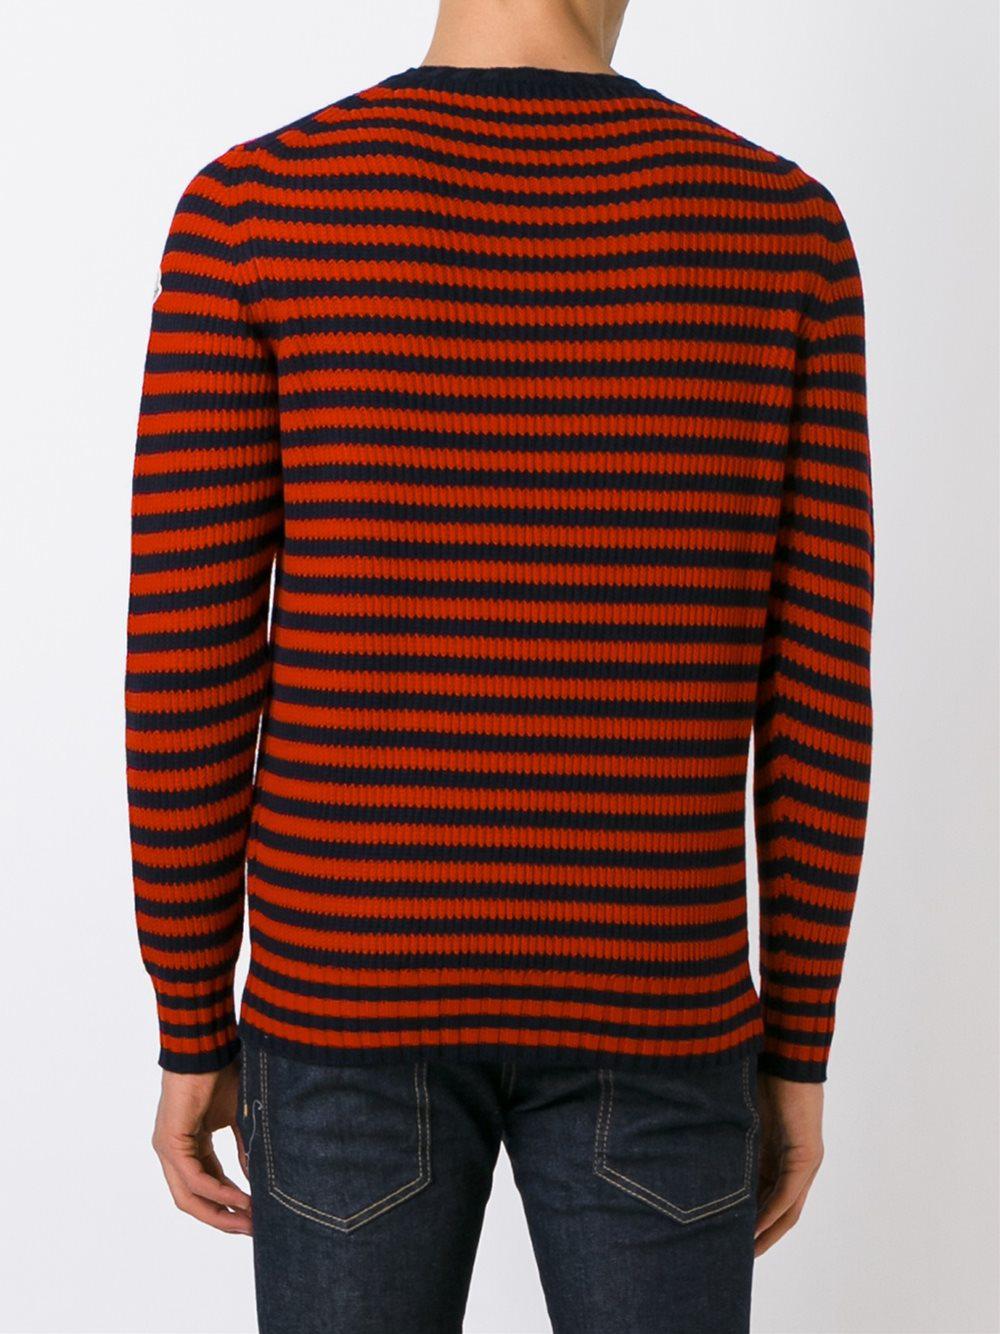 Moncler Wool Striped Knitted Sweater in Red for Men - Lyst